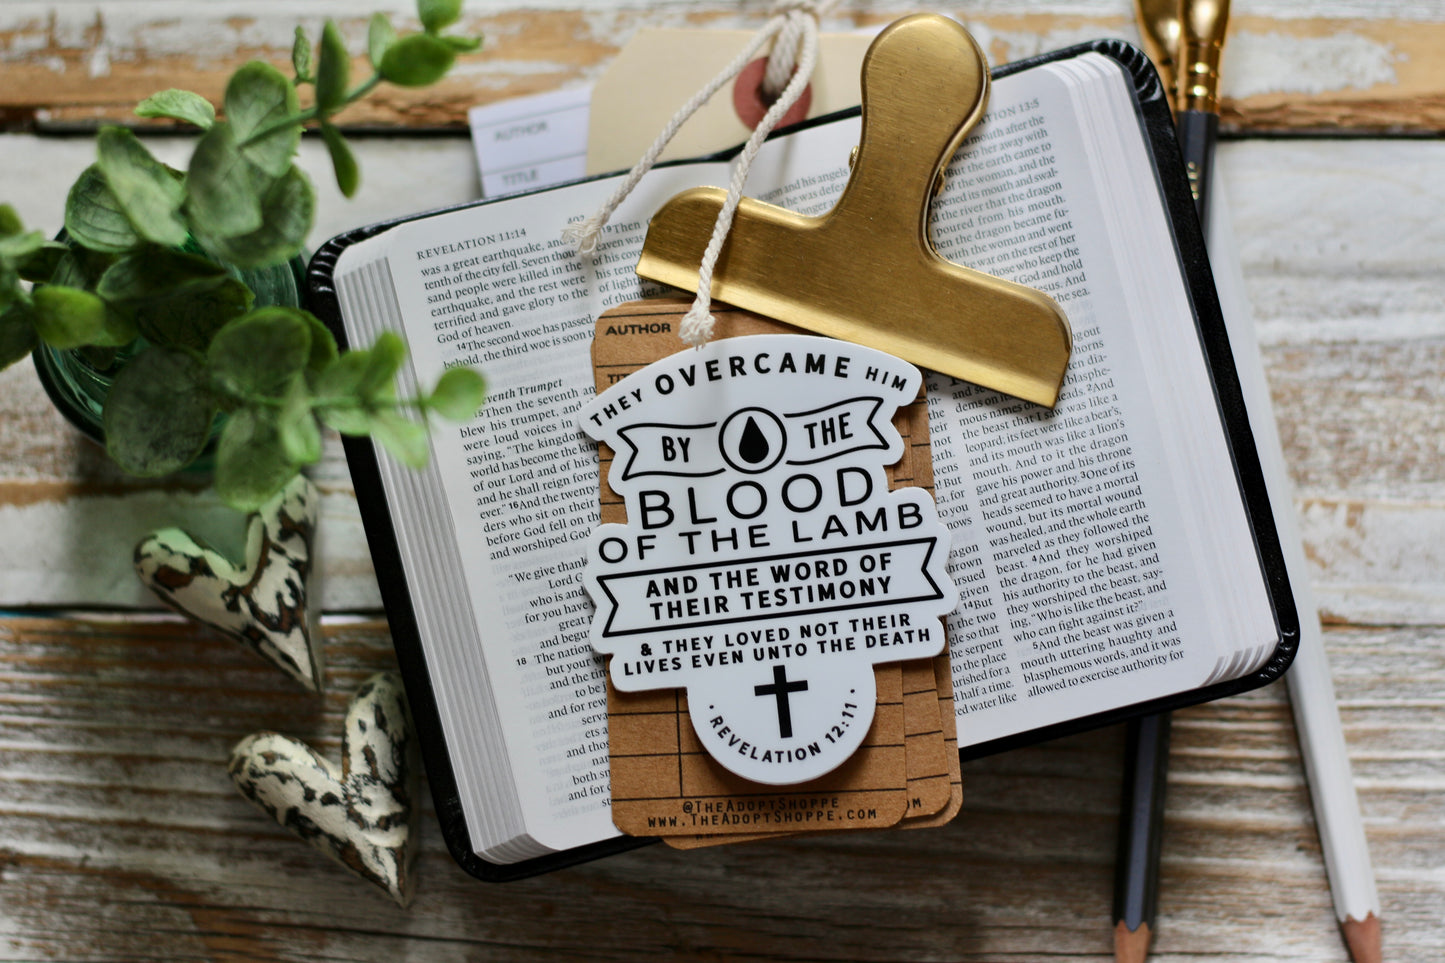 Blood of the Lamb + word of their testimony (Revelation 12:11) waterproof vinyl sticker decal